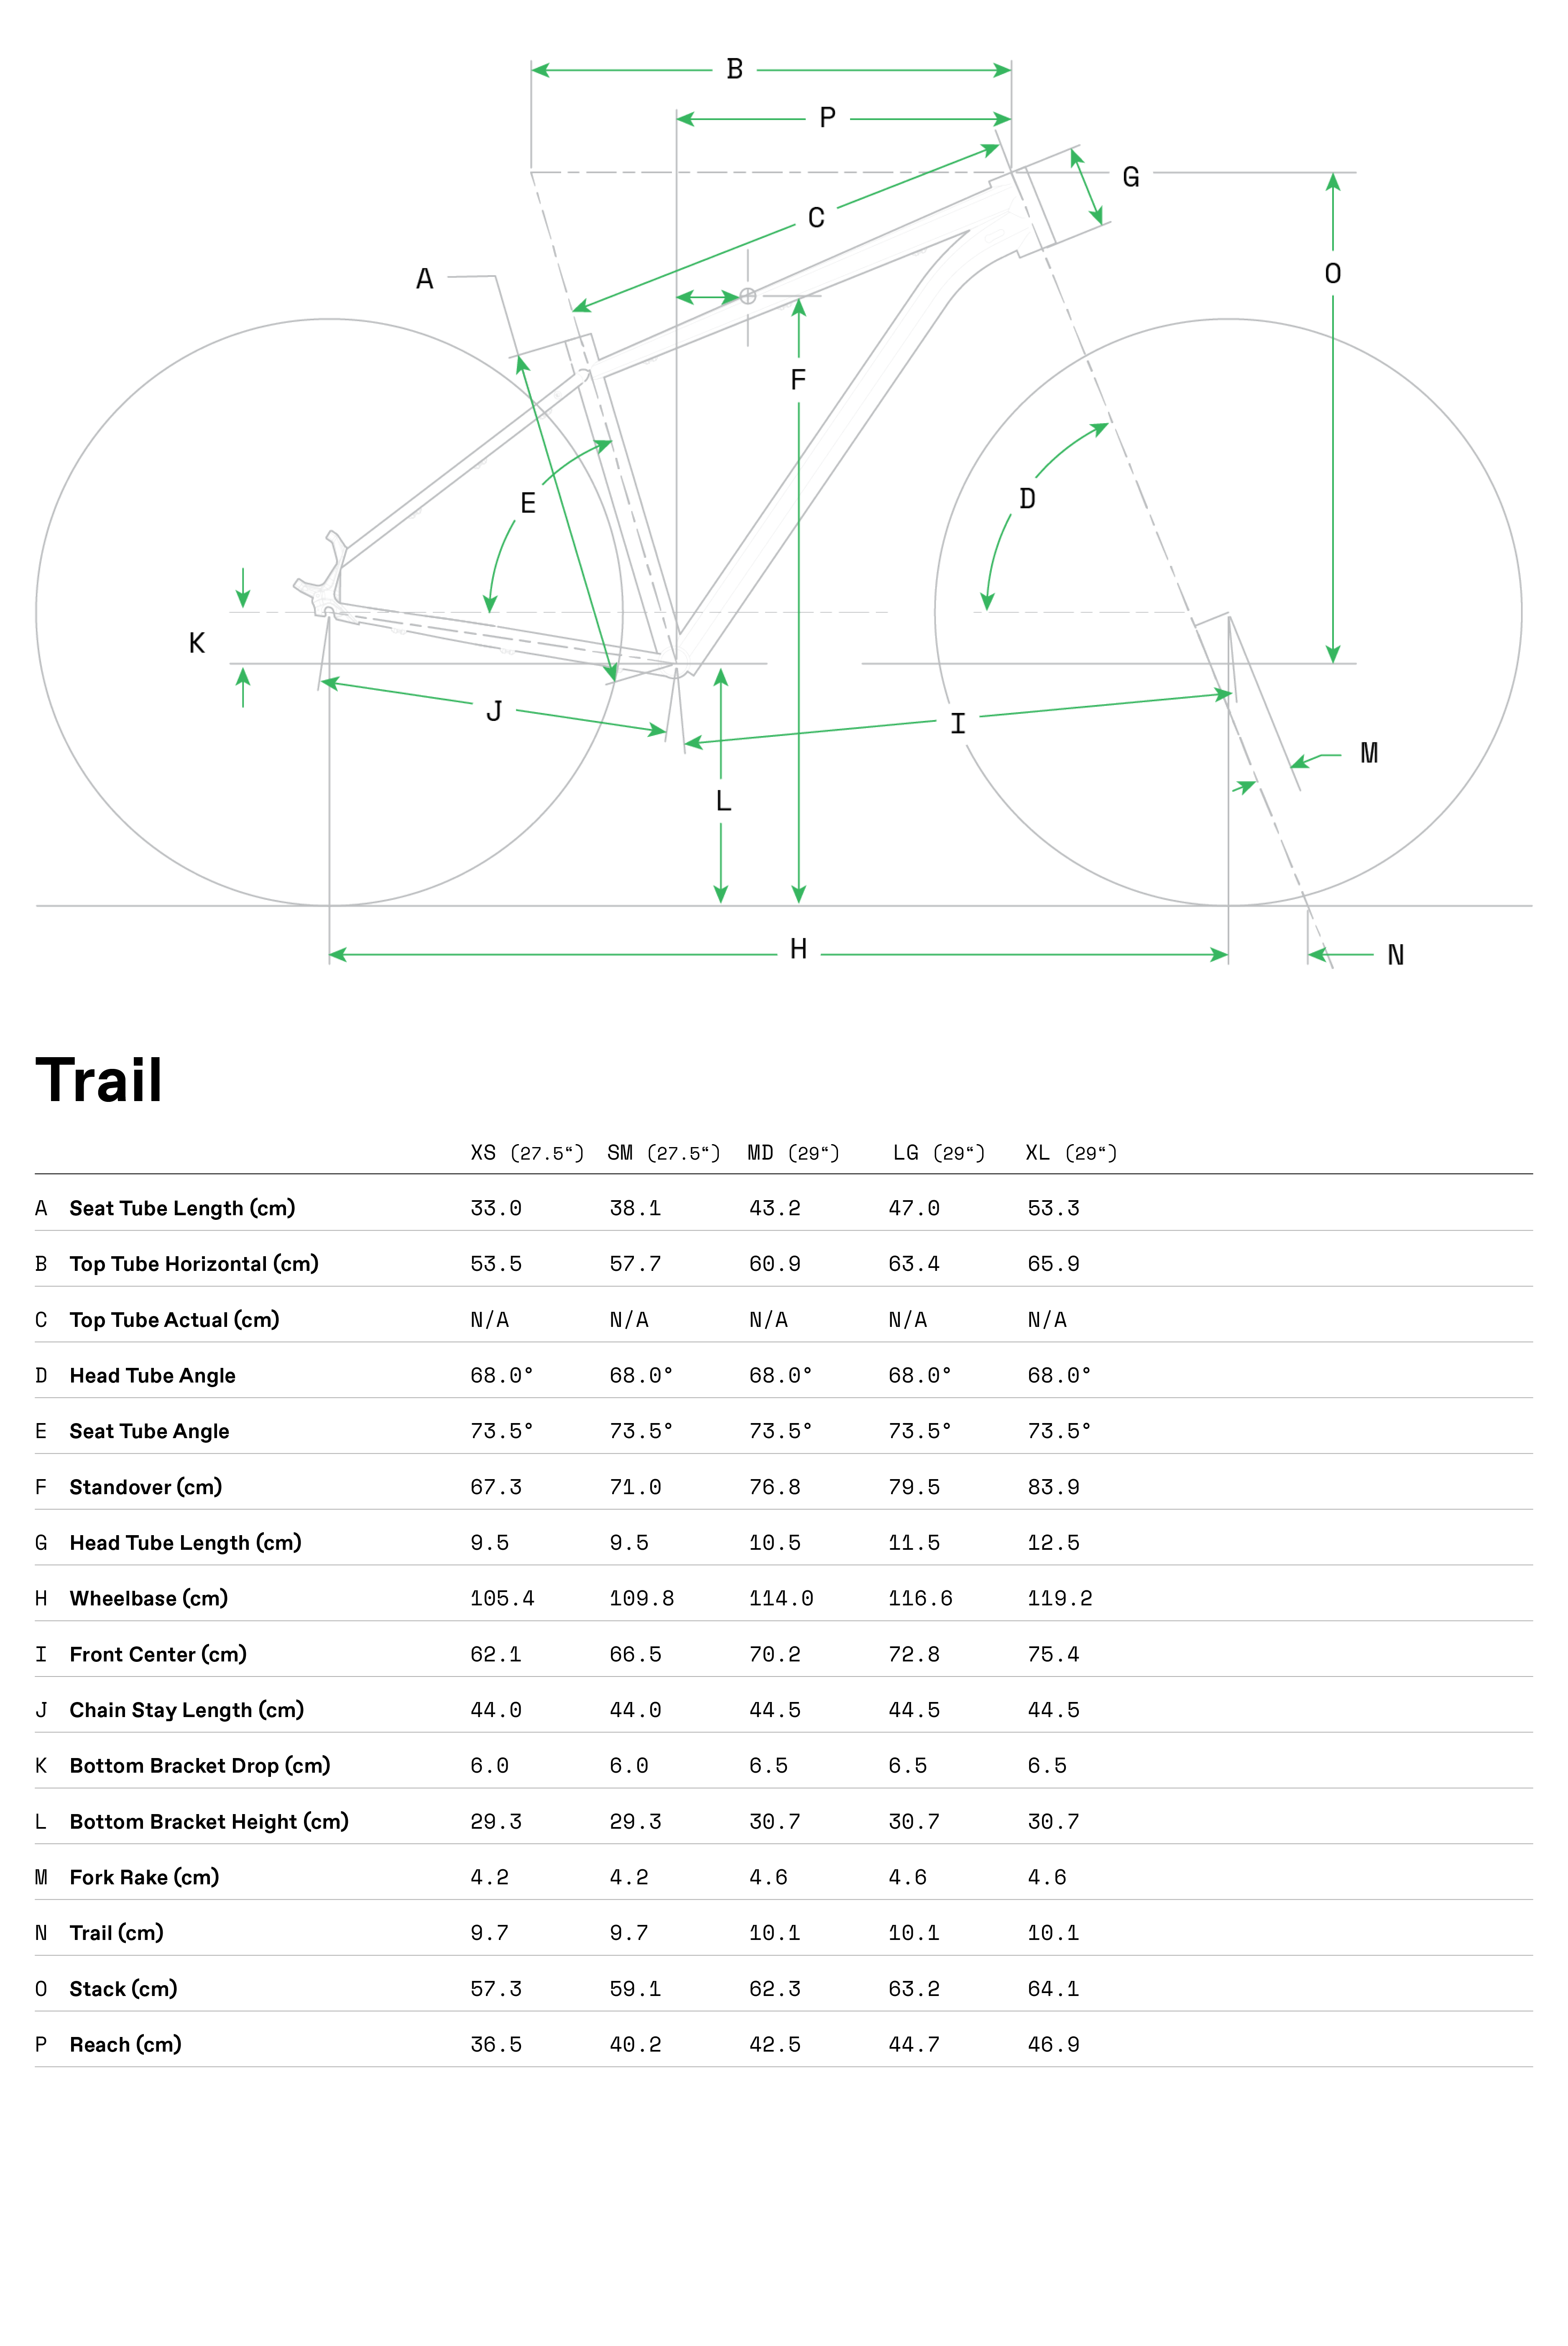 Trail_5_8_Geo_Table.png